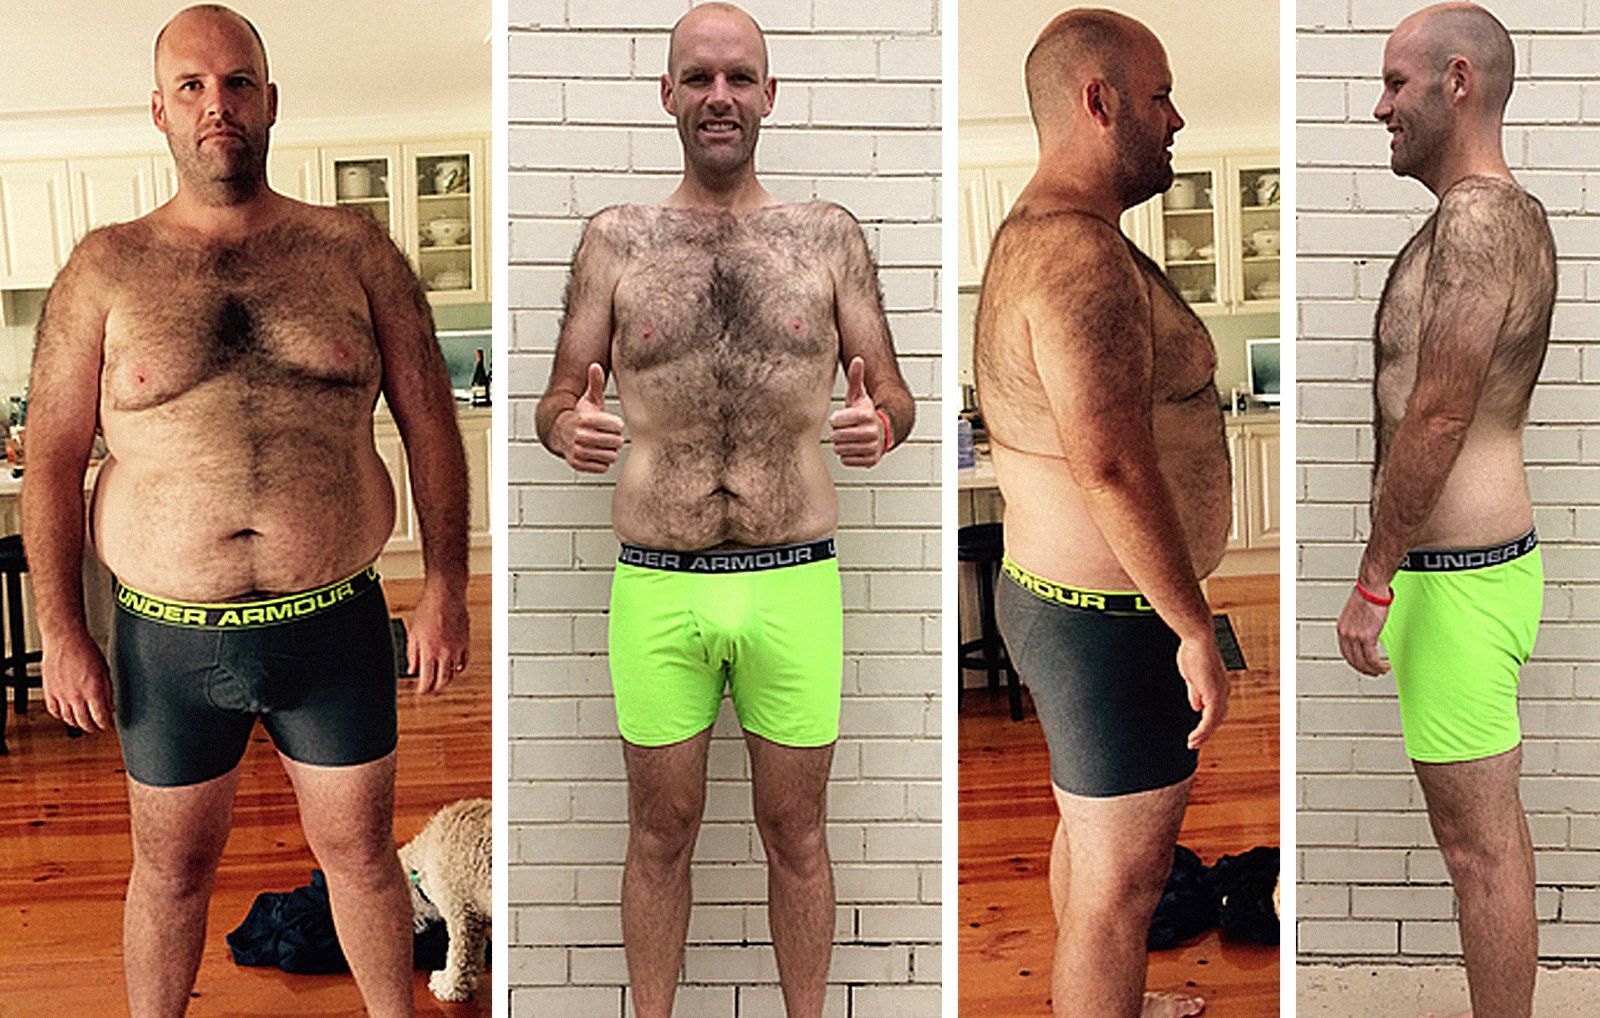 This Man Ate Only Potatoes for One Year and Lost 117 Pounds